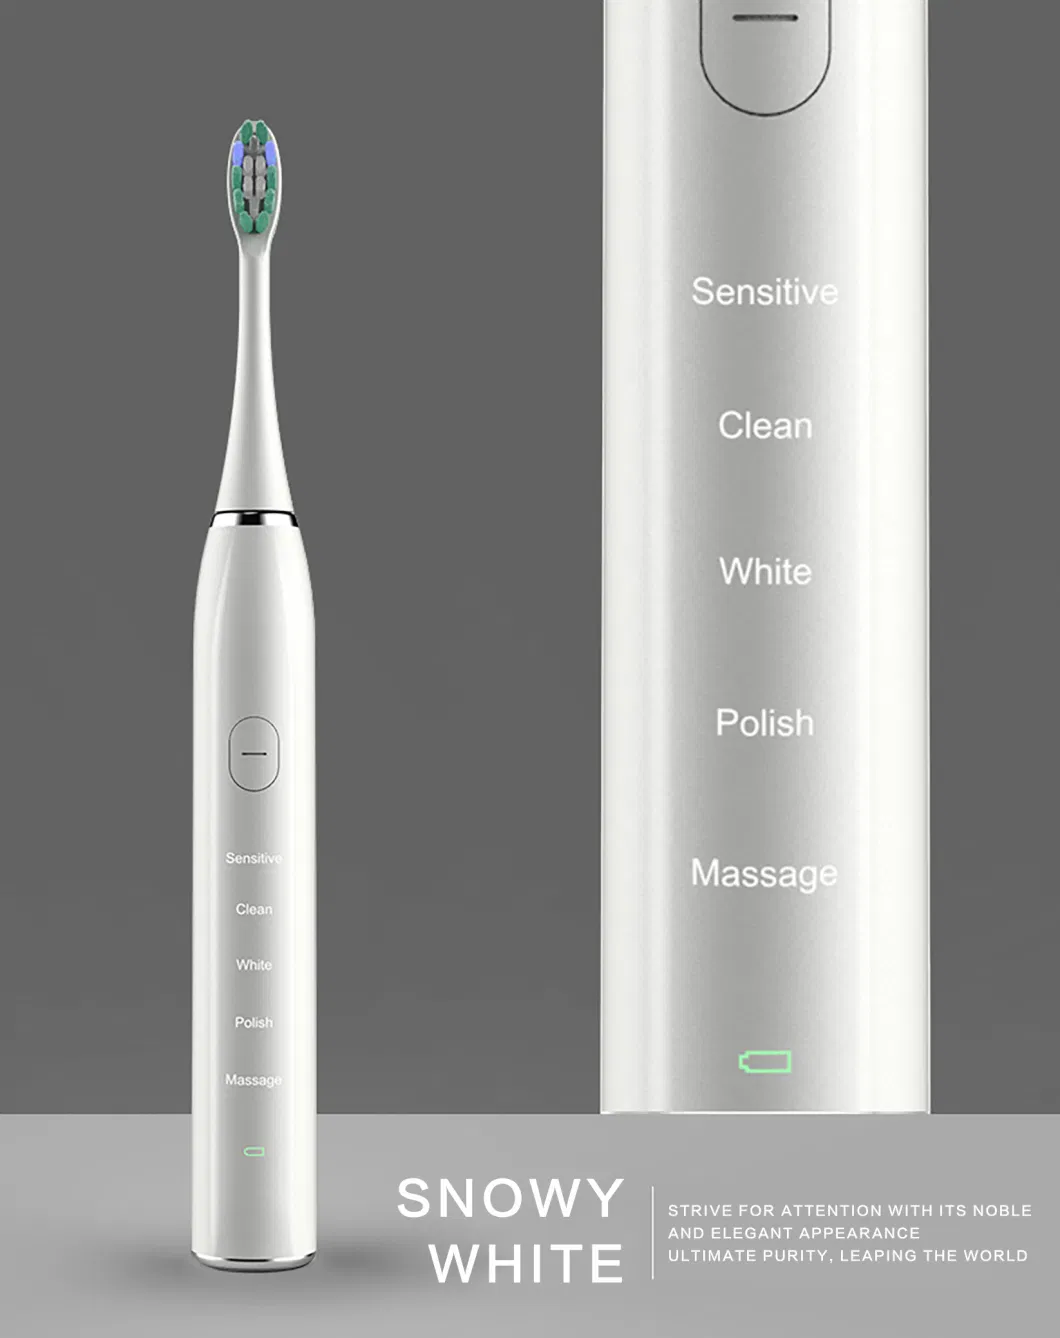 Sonic Technology 5 Models Oral Care Dental Care Electric Toothbrush